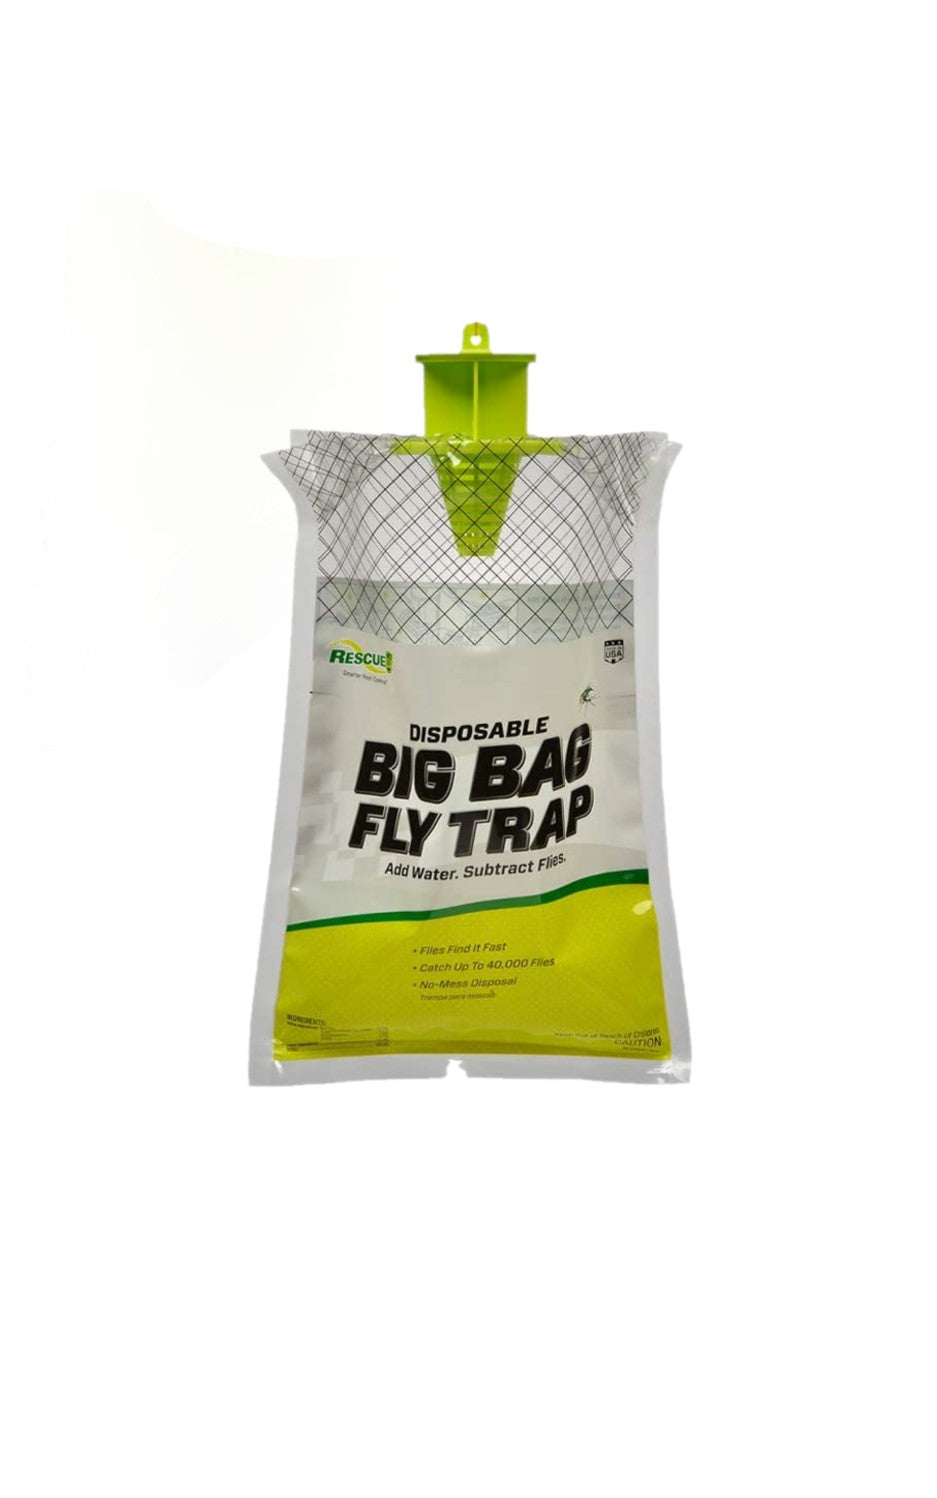 CHS Rescue Disposable Big Bag Fly Trap (Large) contains a fast acting attractant that is activated by adding water to the bag, attractant is comprised of food and feed ingredients, and other food flavorings generally recognized as safe